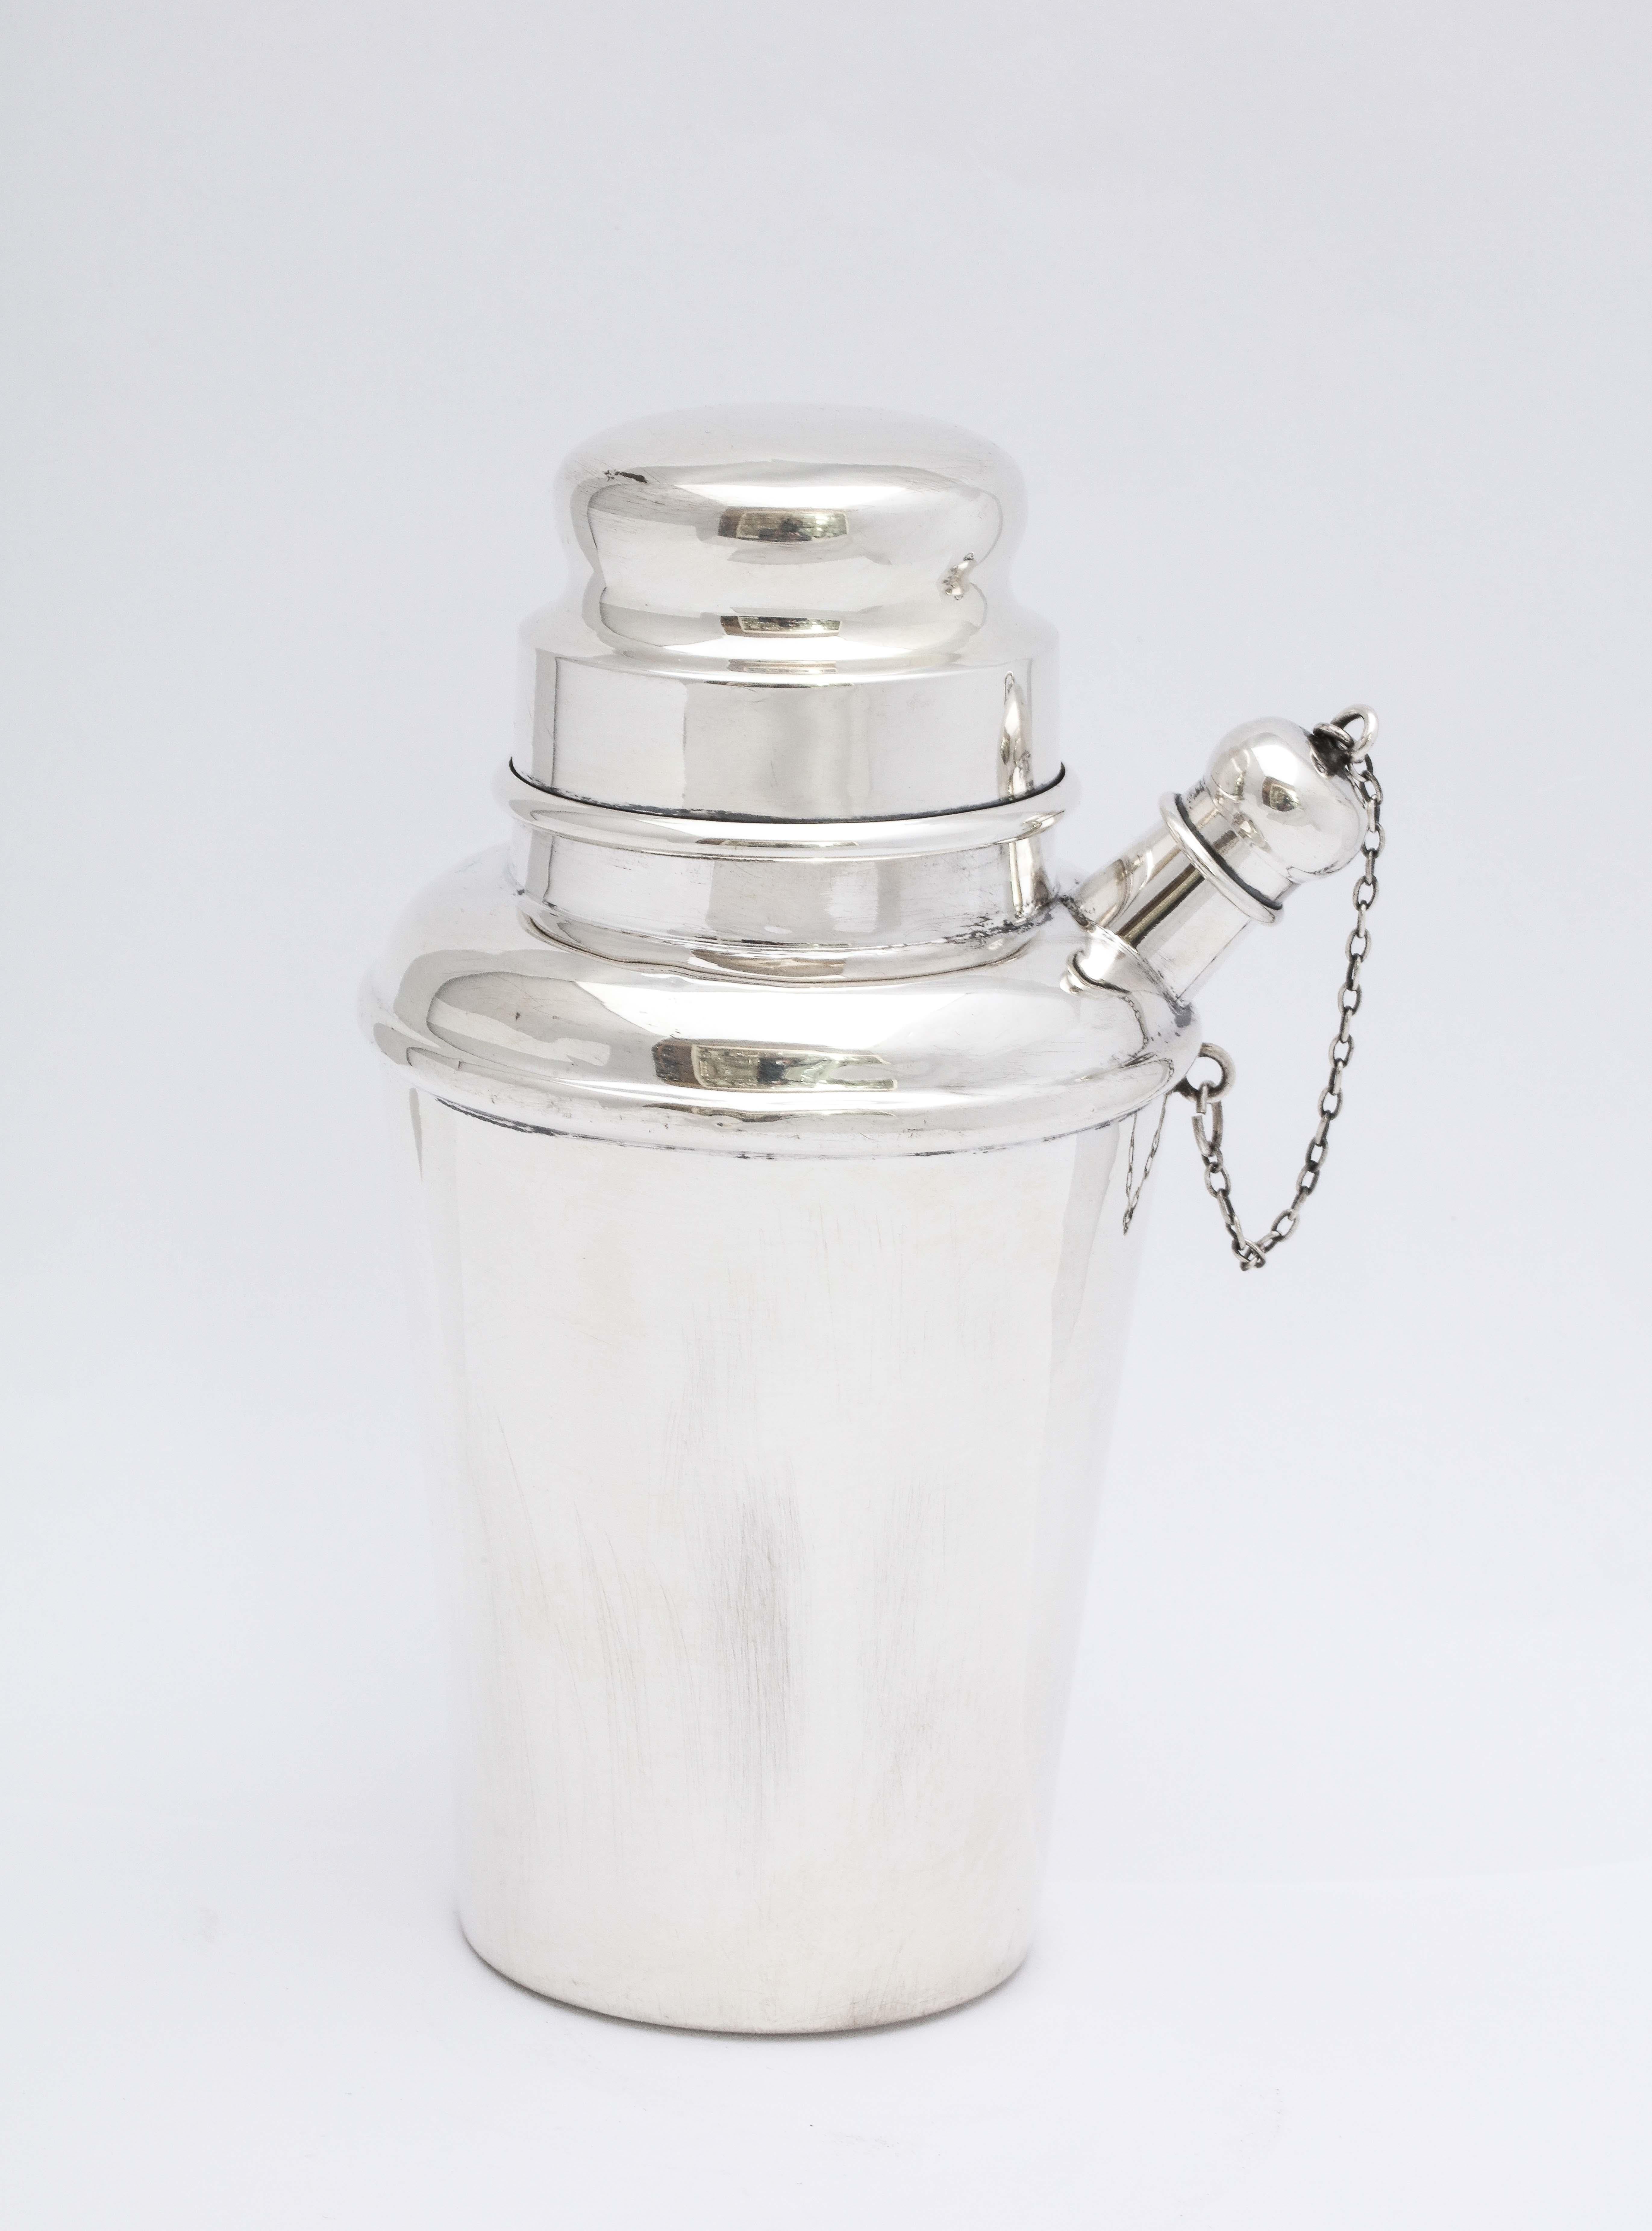 Art Deco, sterling silver cocktail shaker, Currier and Roby, New York, Ca. 1930's. Measures 5 3/4 inches high x 3 1.4 diameter at widest point x 4 inches wide from outside edge of spout to outside edge of shaker. Weighs 4.760 troy ounces. There are